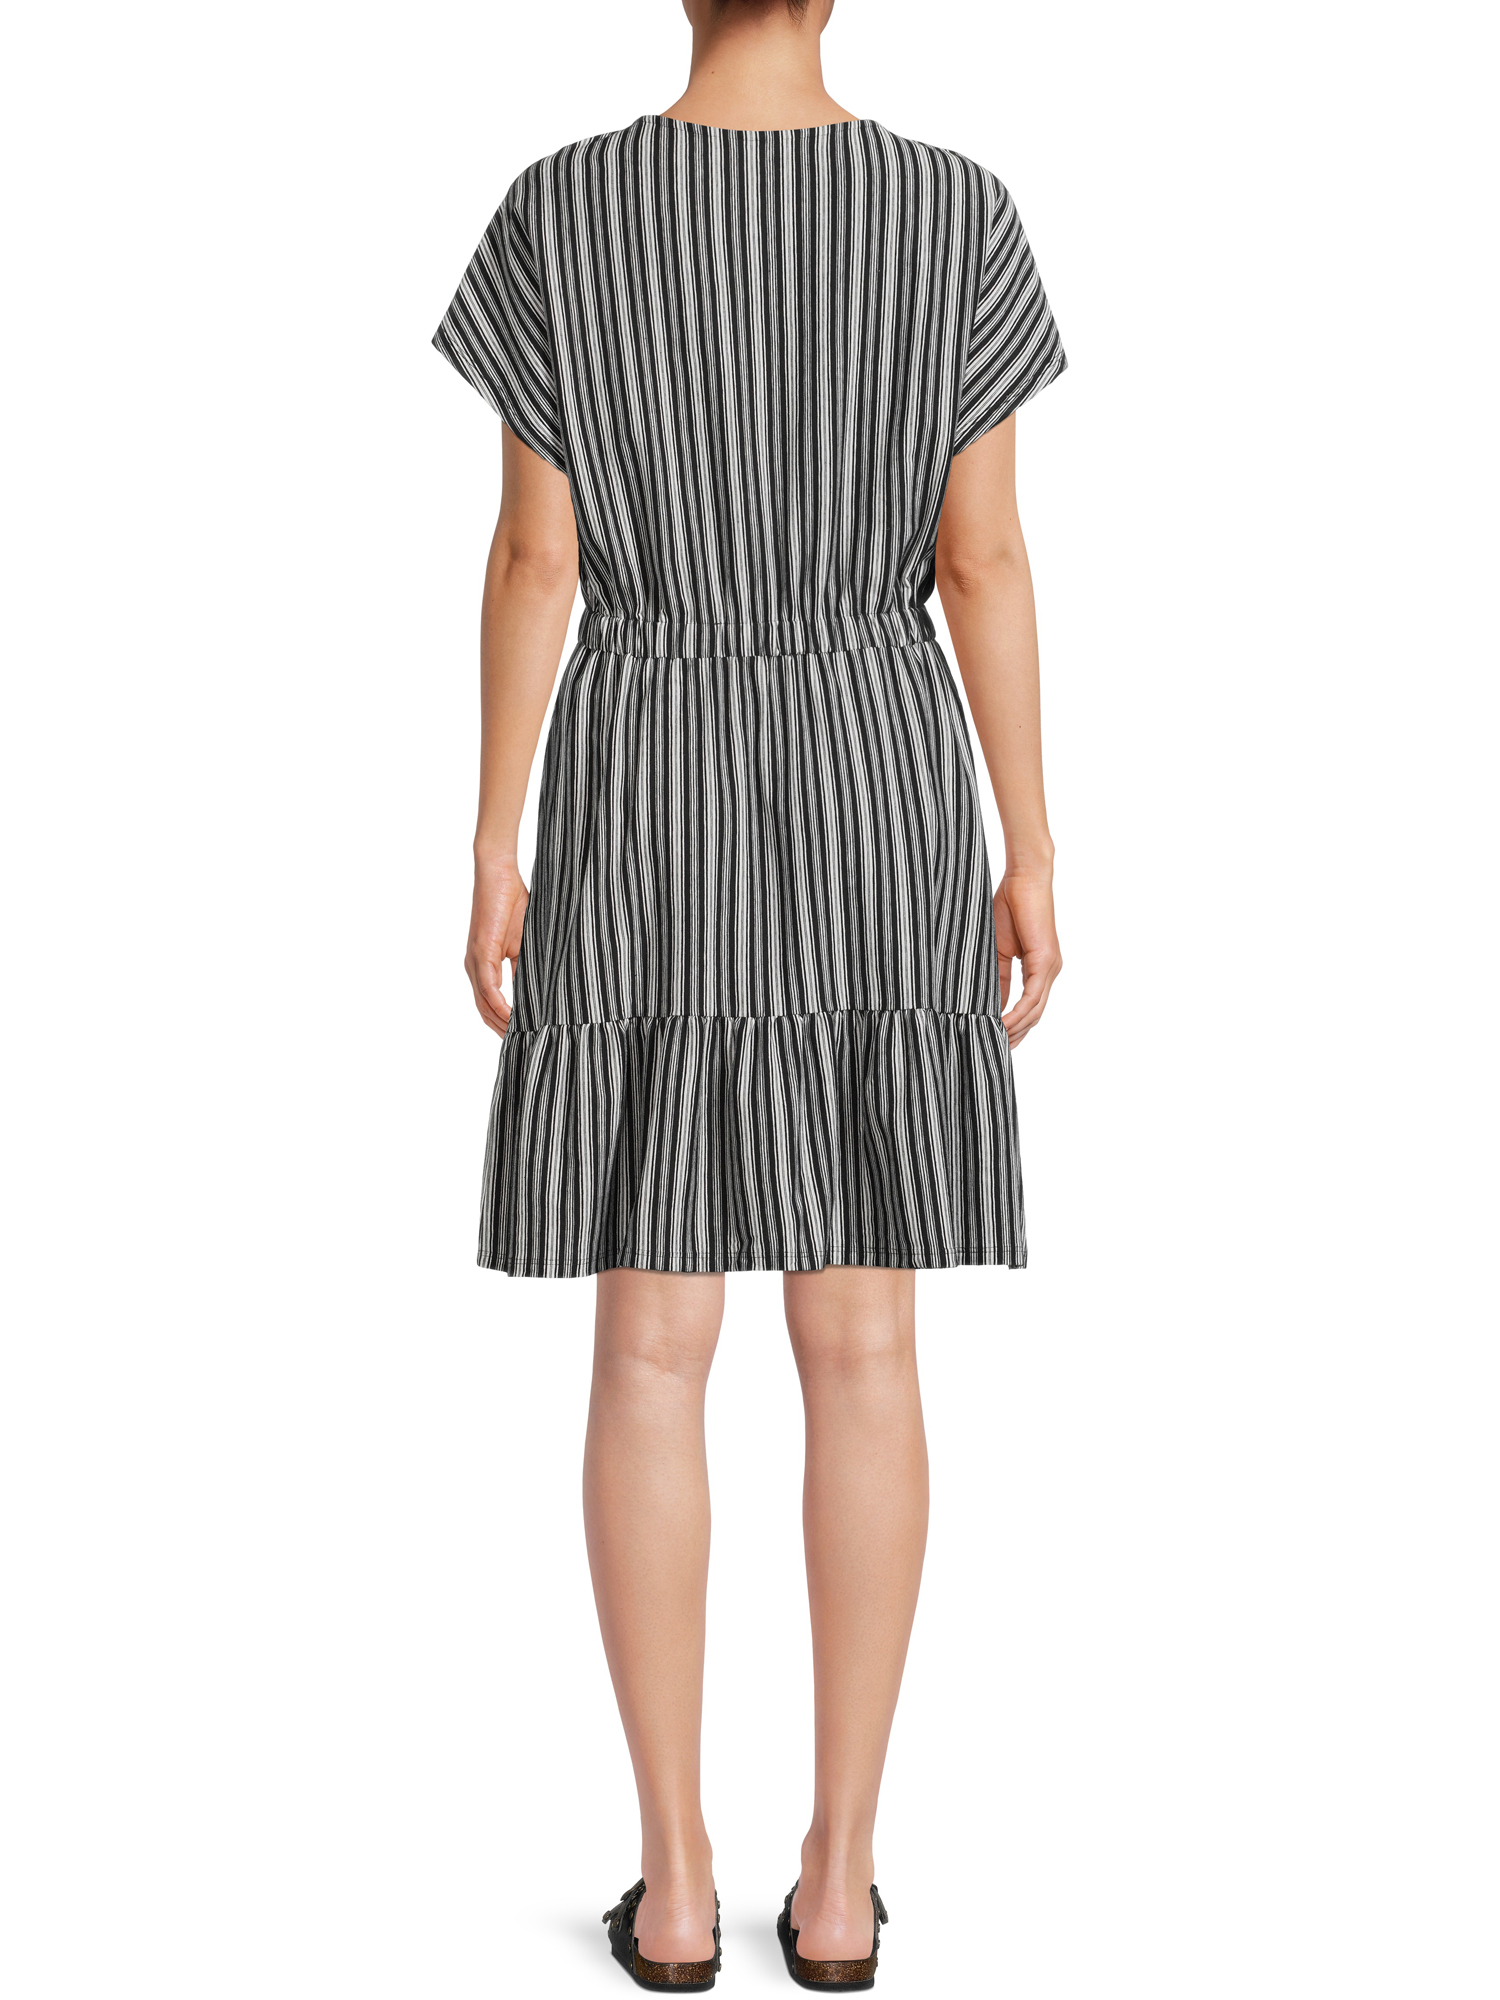 Time and Tru Women's V-Neck Printed Knit Dress - image 3 of 5